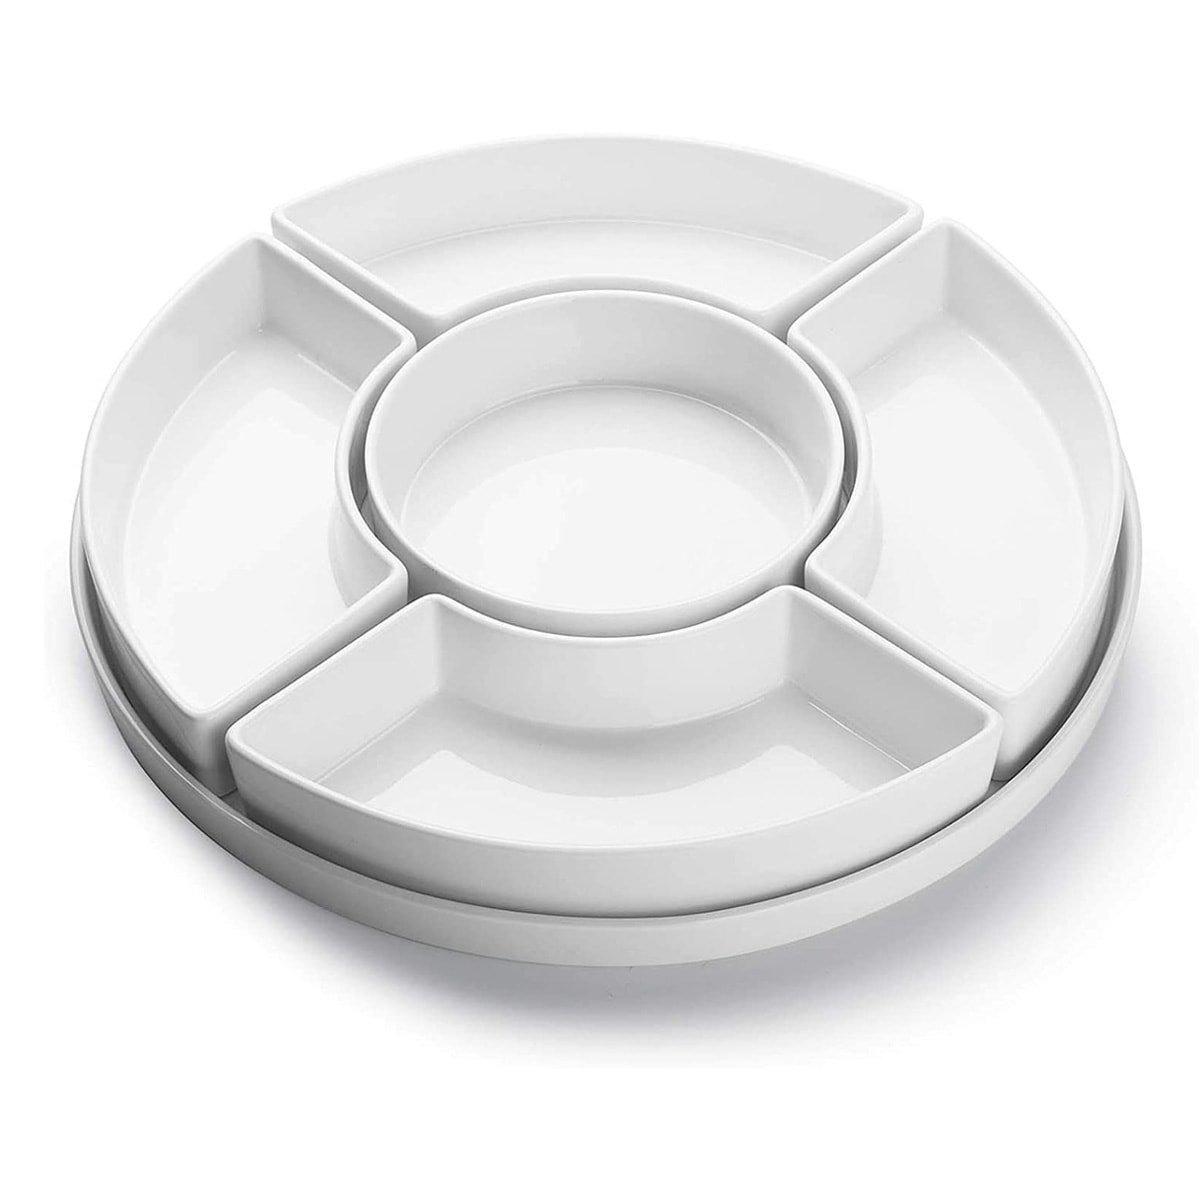 A circular white porcelain serving dish with multiple removeable compartments.